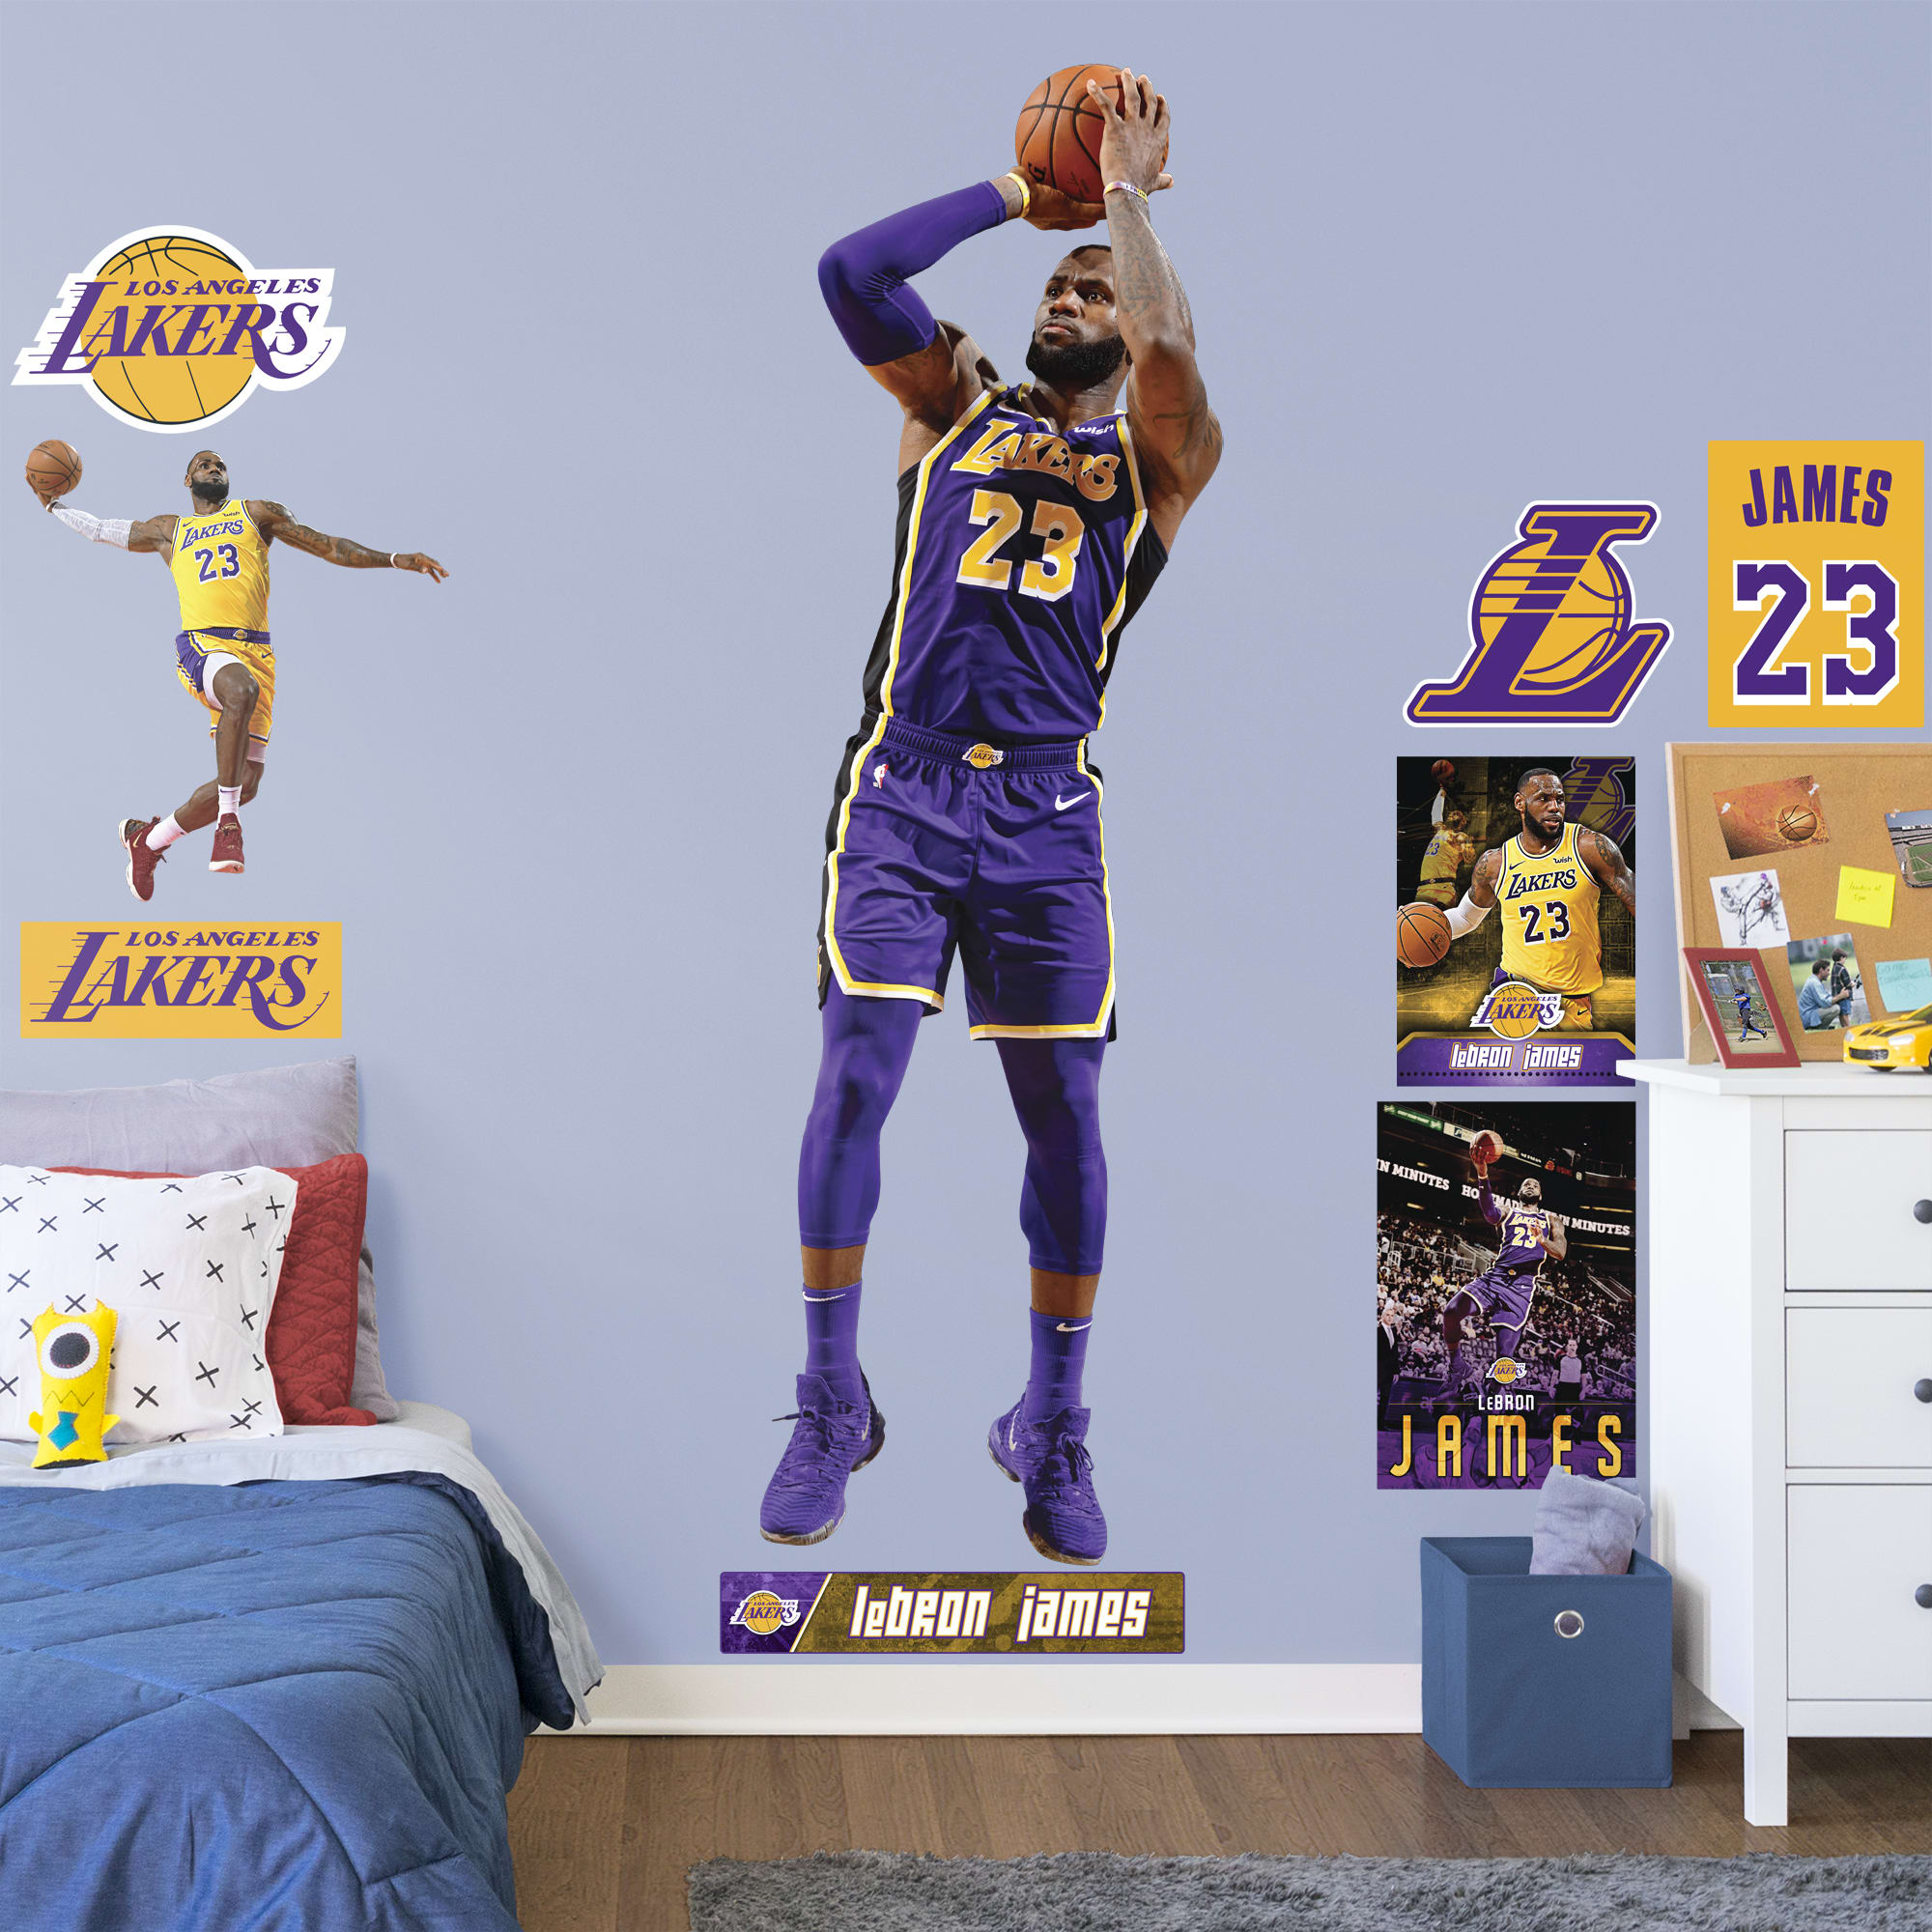 LeBron James for Los Angeles Lakers: Shooting - Officially Licensed NBA Removable Wall Decal Life-Size Athlete + 10 Decals (26"W